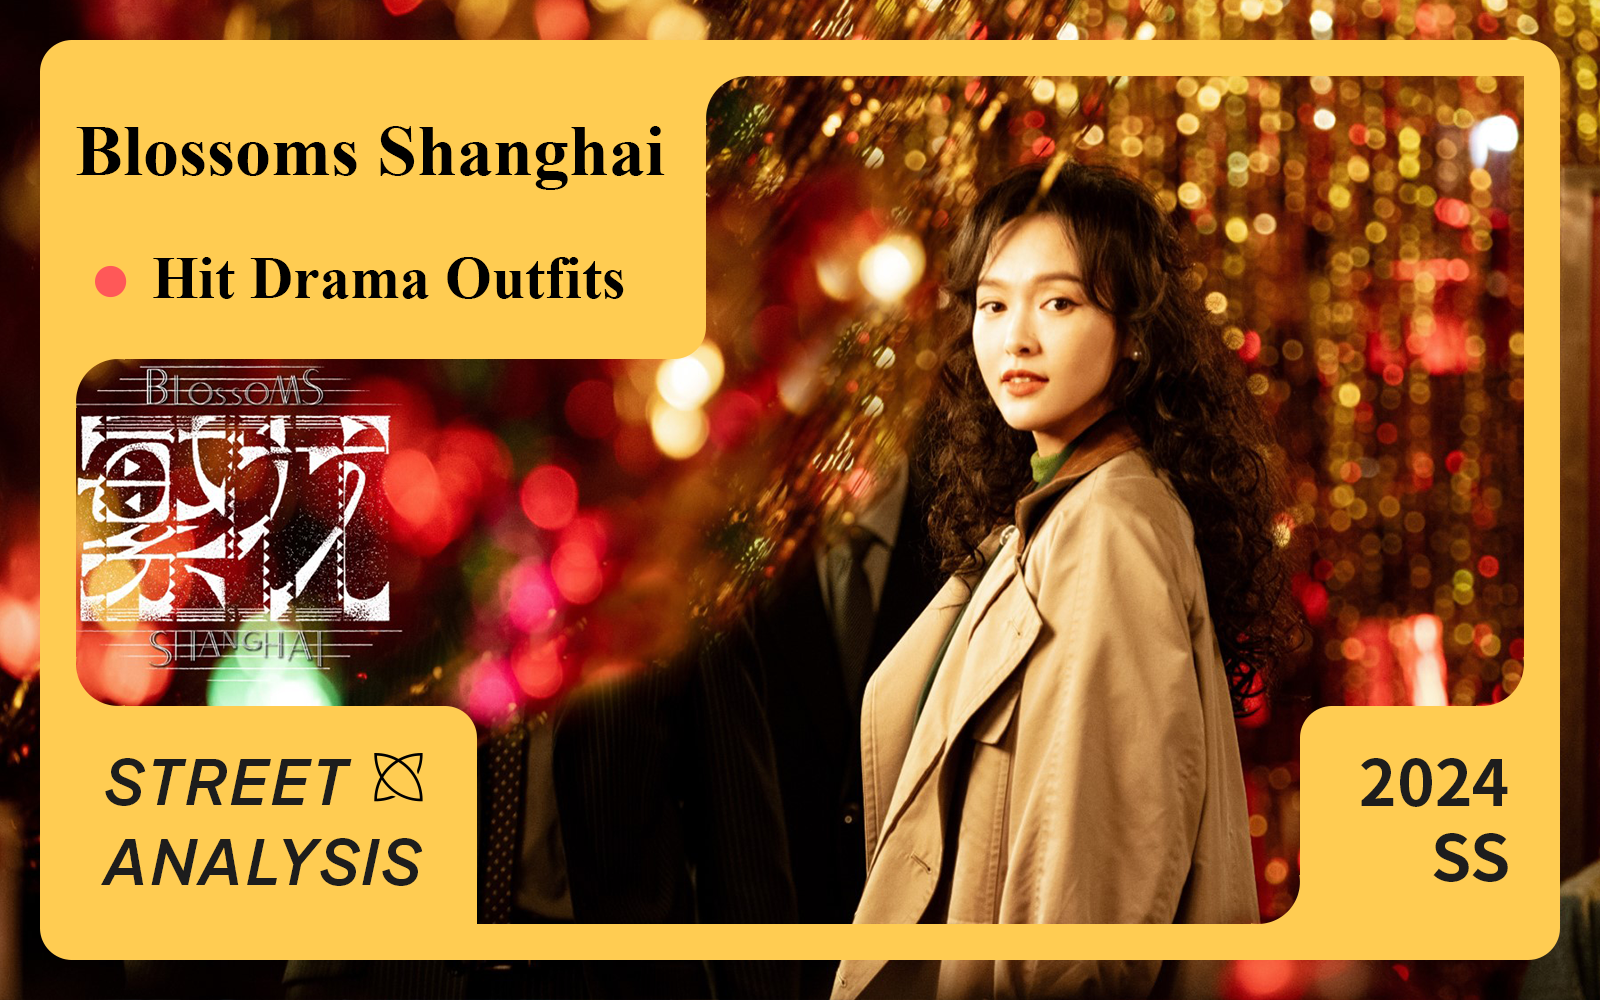 Blossoms Shanghai -- The Womenswear Analysis of Hit Drama Outfits